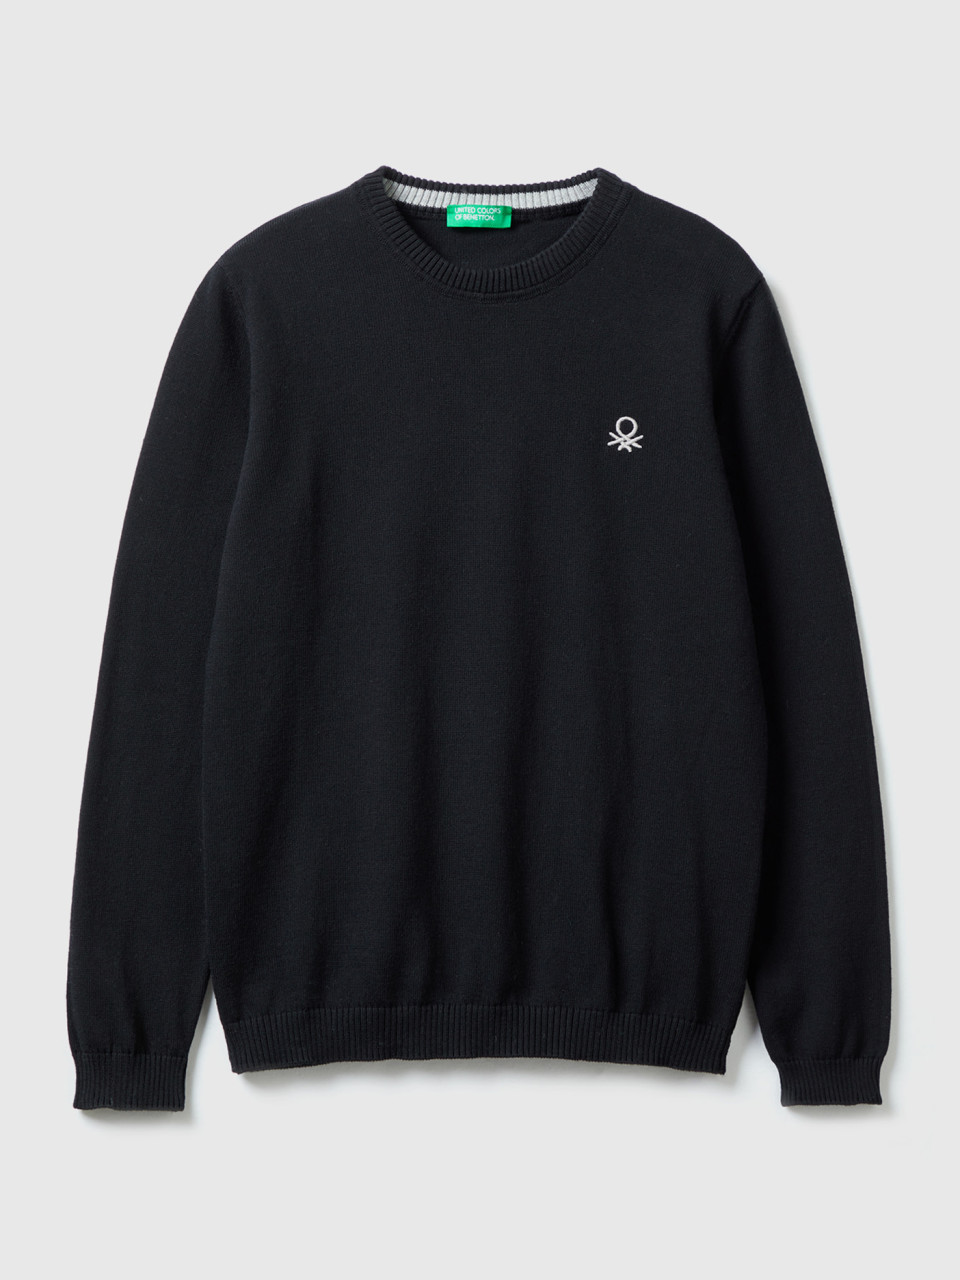 Benetton, Sweater In Pure Cotton With Logo, Black, Kids